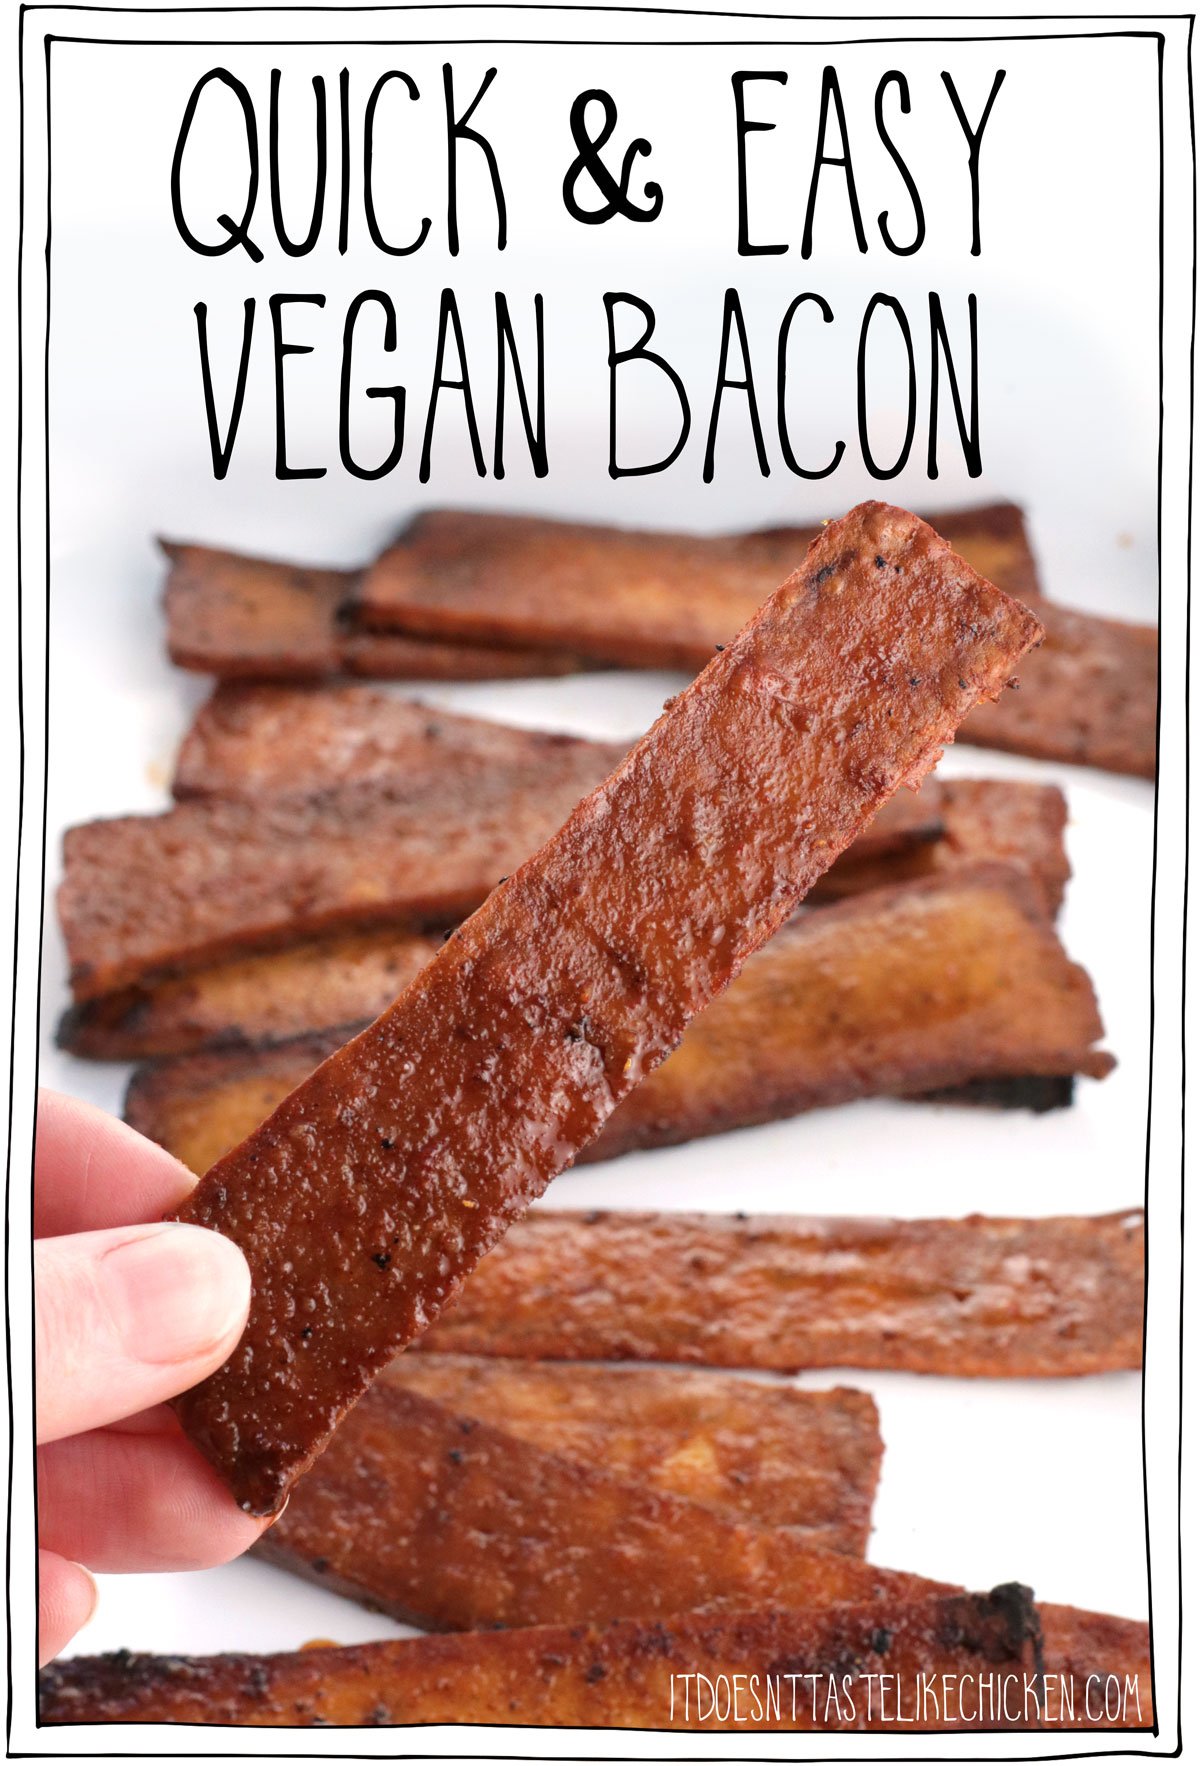 This quick and easy vegan bacon recipe is crispy, chewy, smoky delicious, and made with just 6 ingredients! Tofu strips are marinated in a salty, sweet, smoky marinade that tastes just like bacon. This tofu bacon can marinate in the fridge for up to 3 days so you can prep this ahead of time, and cook it up fresh. Cook it in your air-fryer, bake it, or pan fry it. Perfect for a stress-free morning. It’s so easy-peasy you’re gonna love it! 